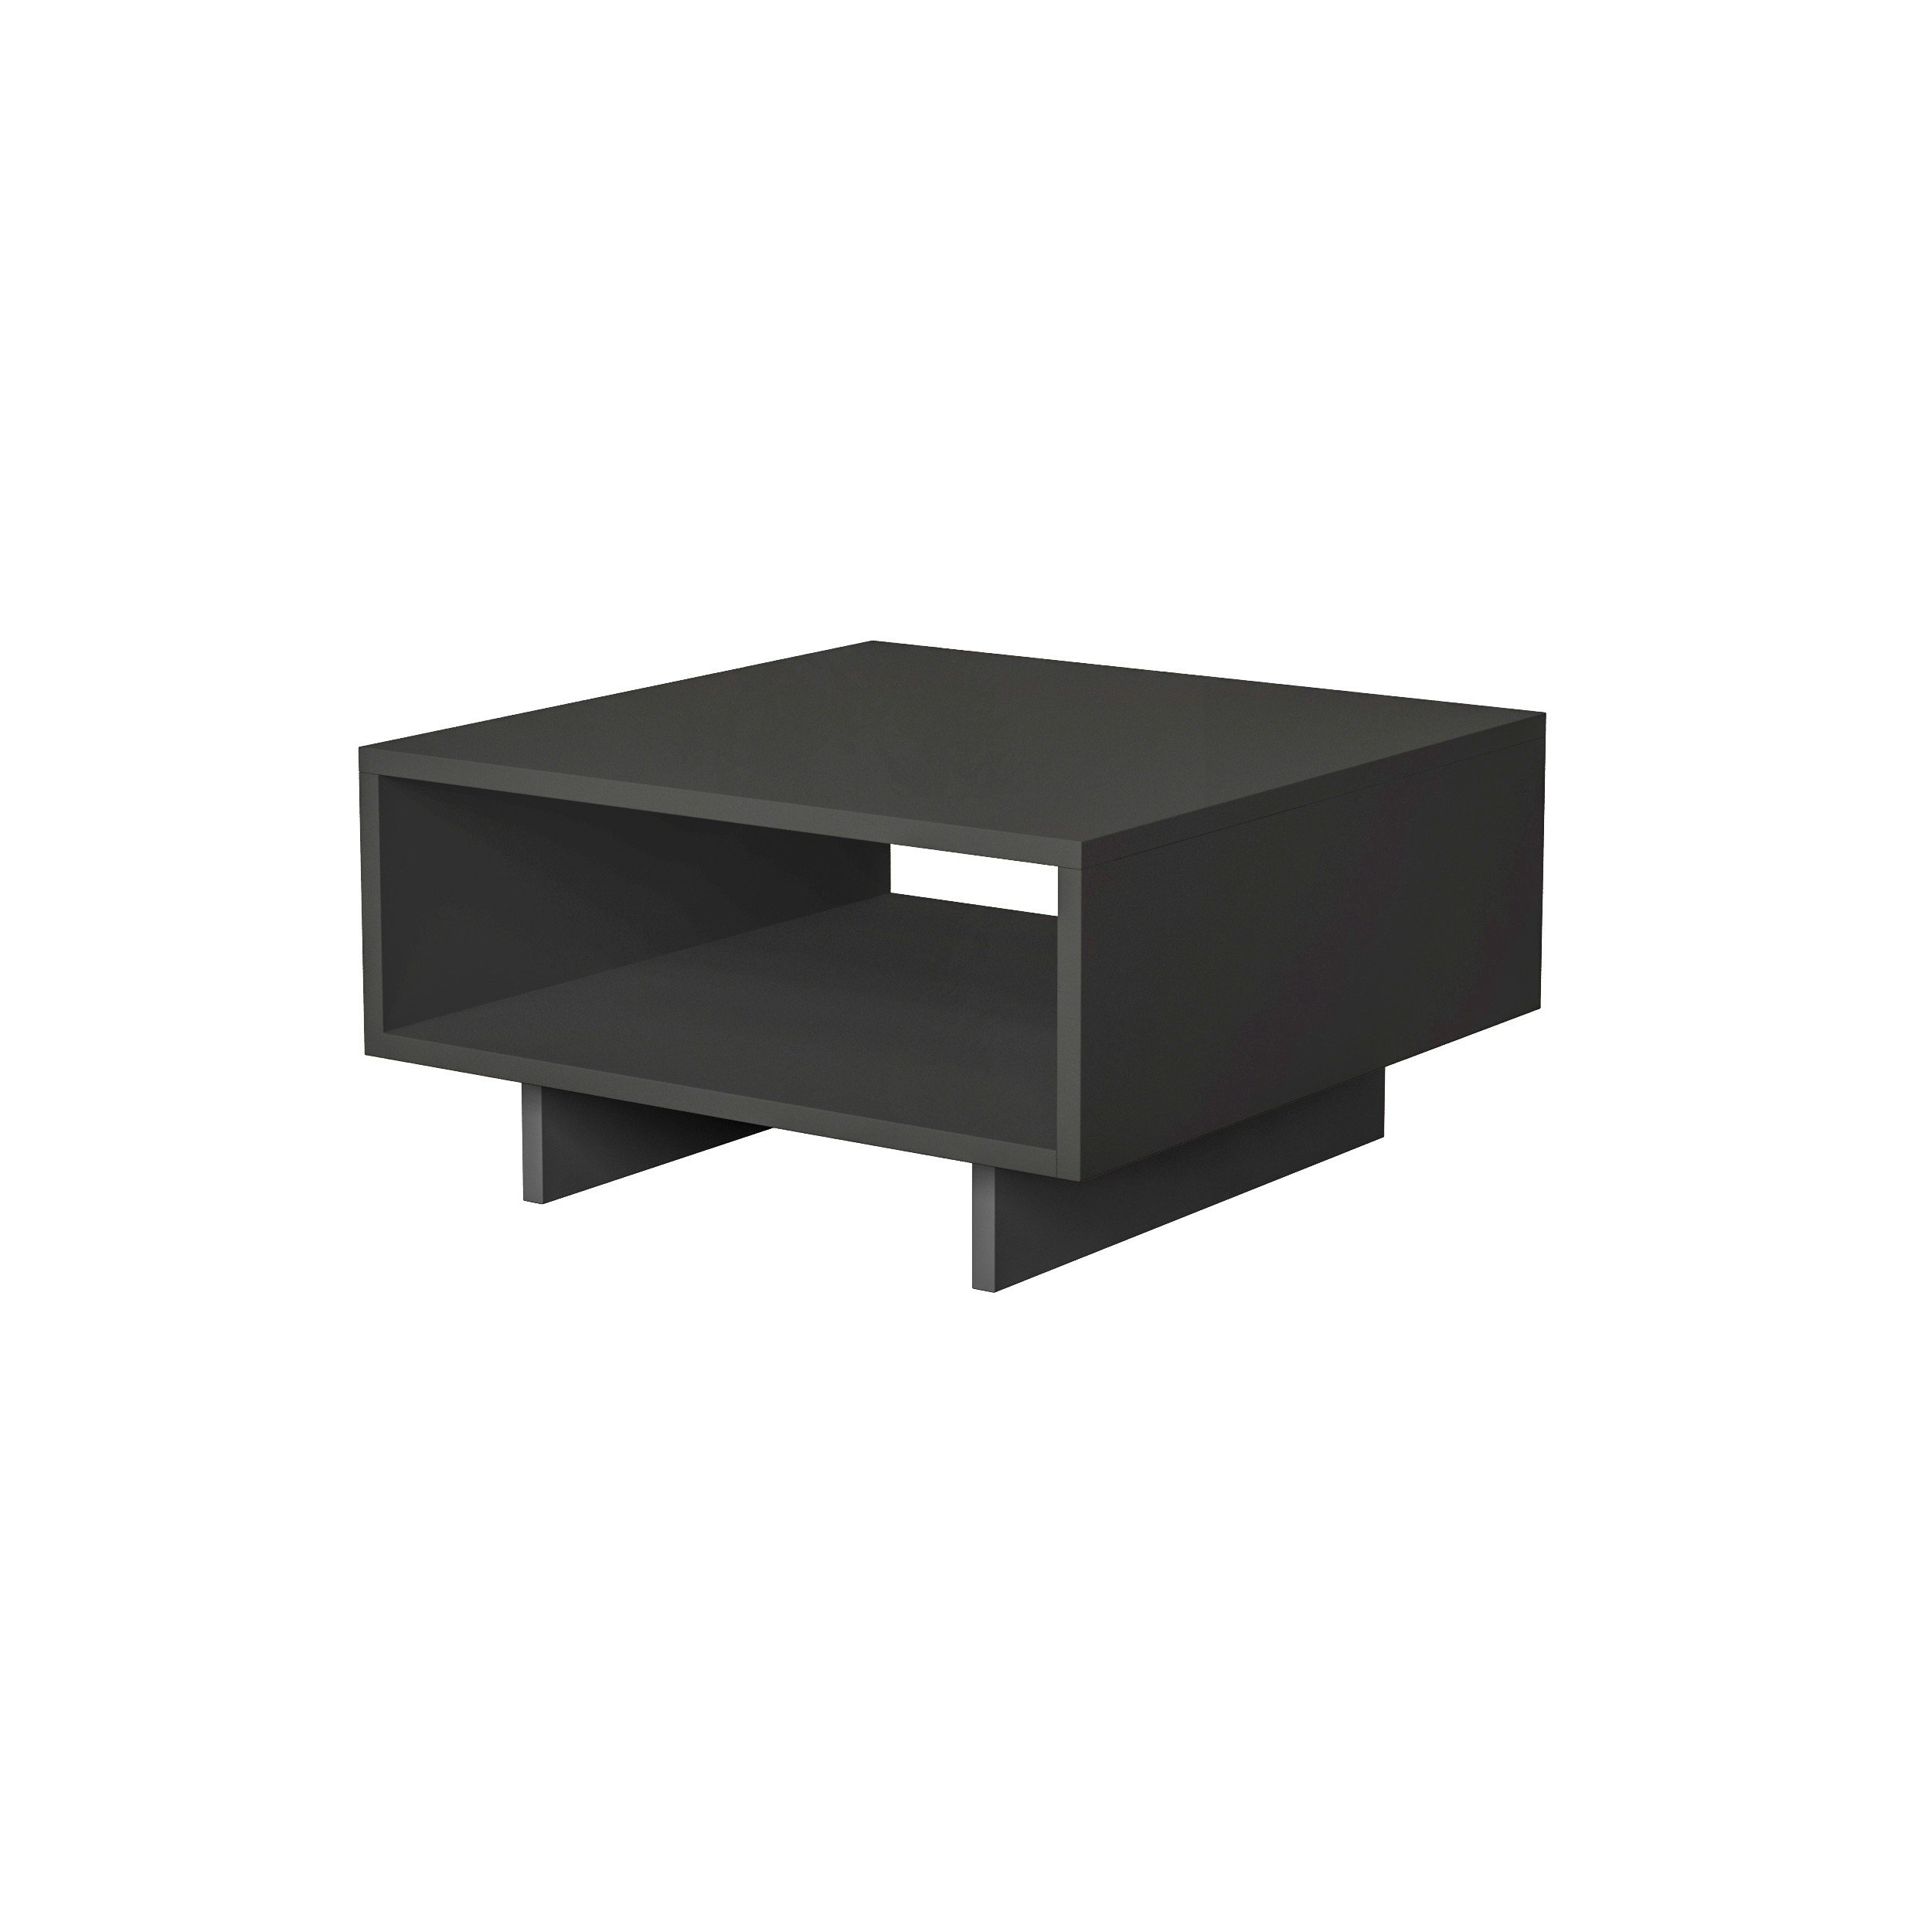 HOLA COFFEE TABLE - ANTHRACITE - ANTHRACITE - M.SH.11040.6